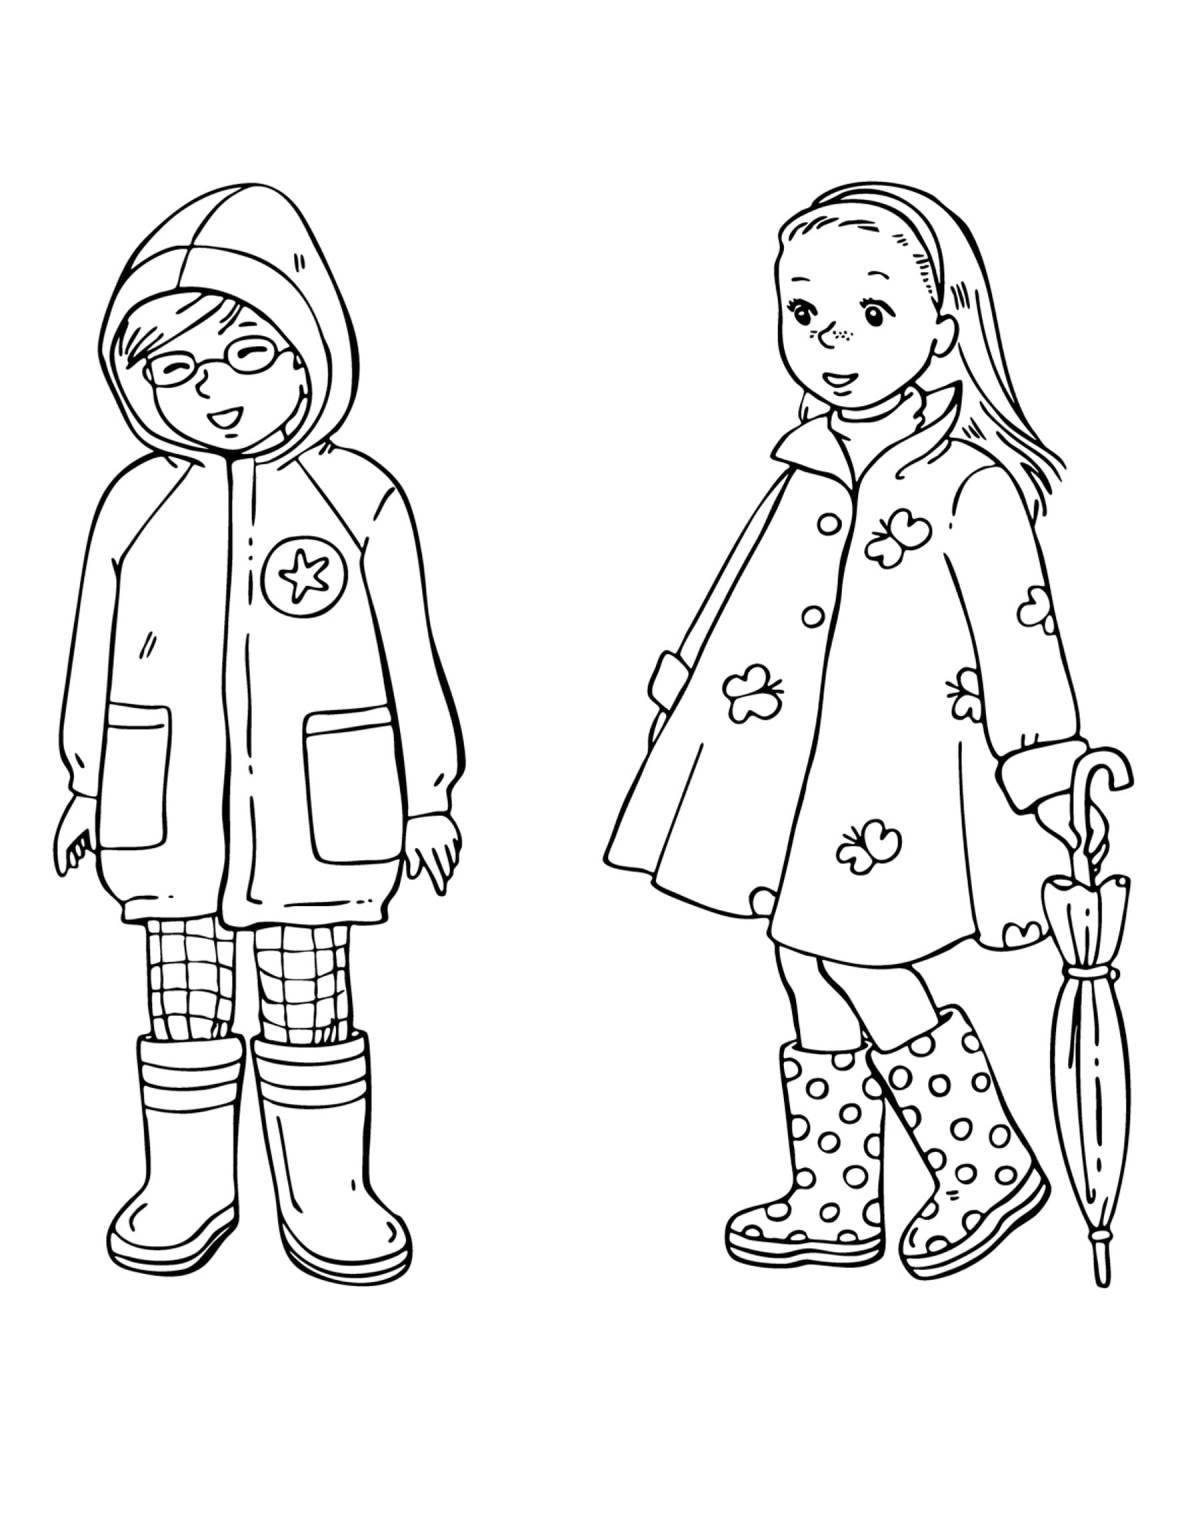 Coloring page charming clothes for children 5-6 years old